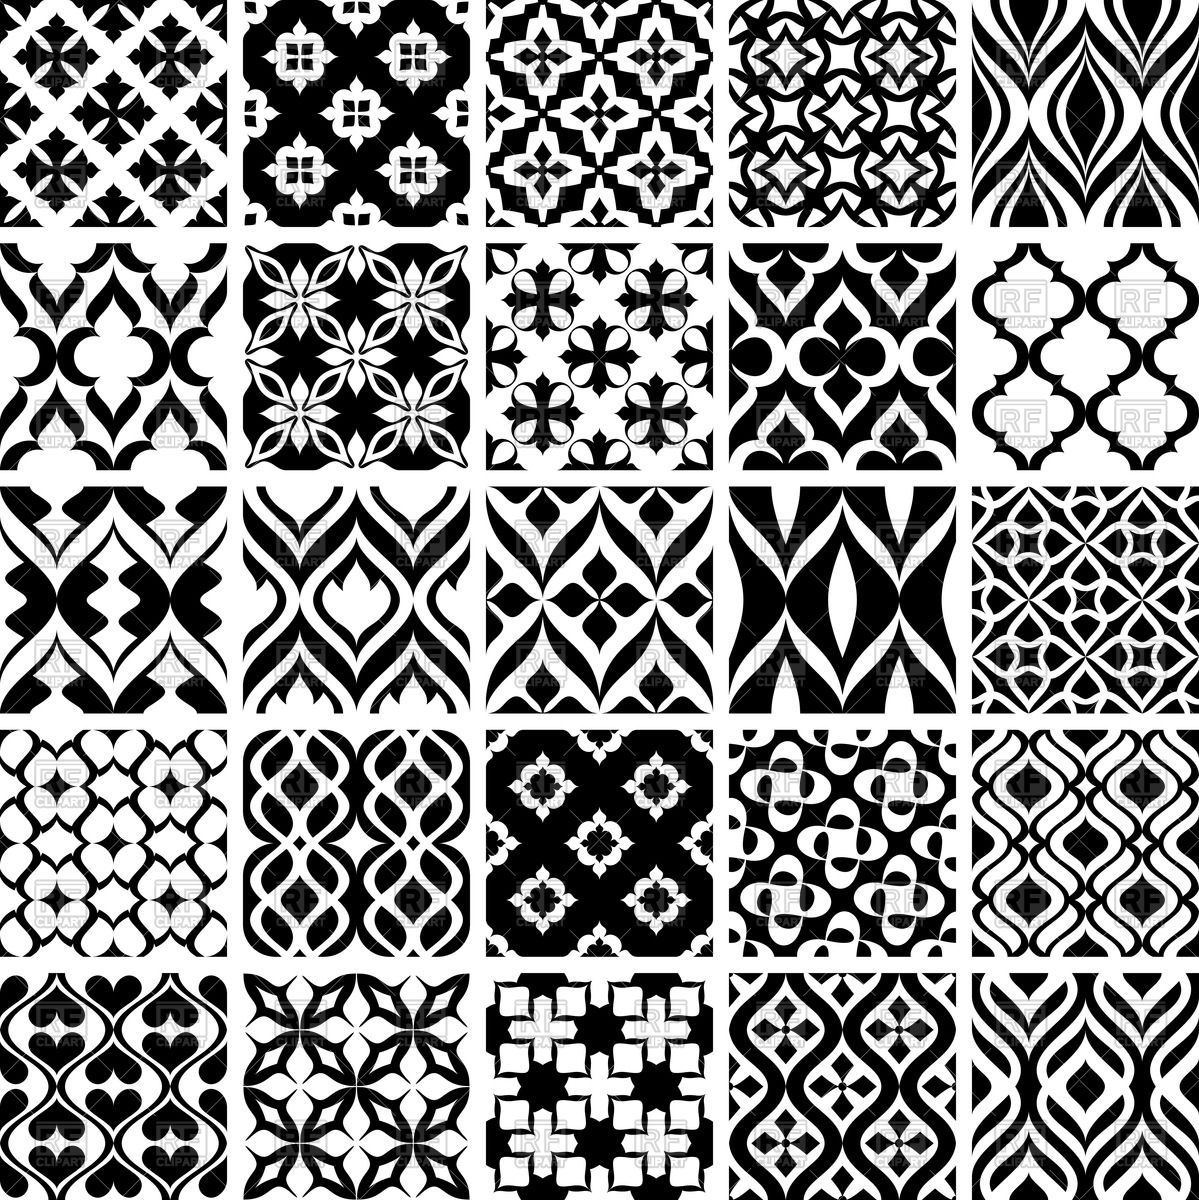 Black And White Seamless Simple Classic Patterns 46848 Backgrounds